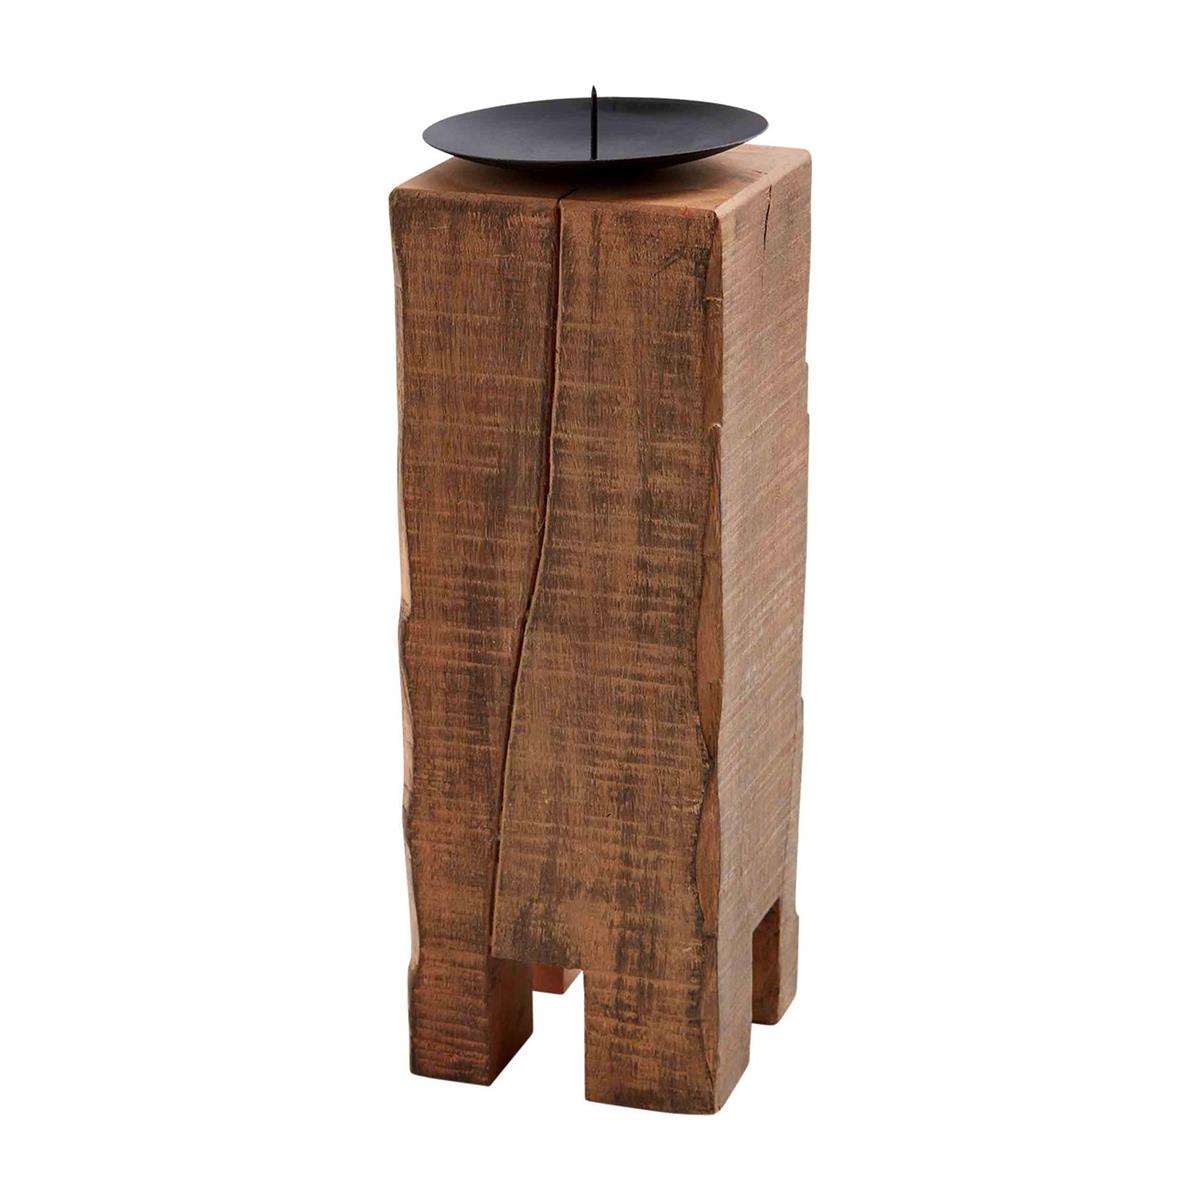 Reclaimed Wood Candlestick